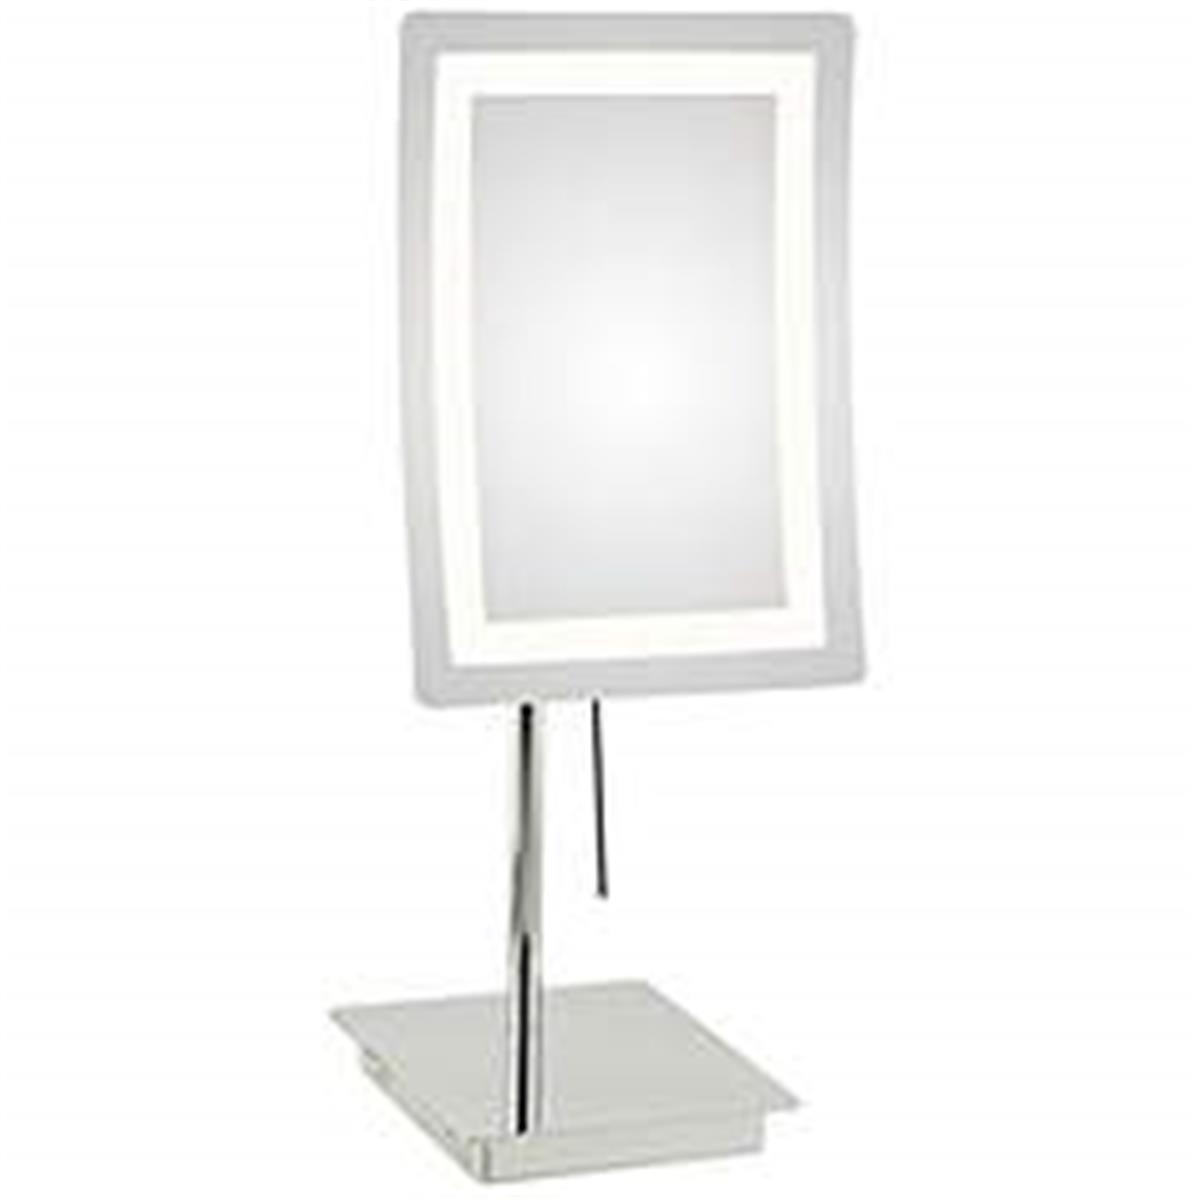 Aptations 713-55-43 Single-sided Led Square Freestanding Mirror - Rechargeable, Chrome